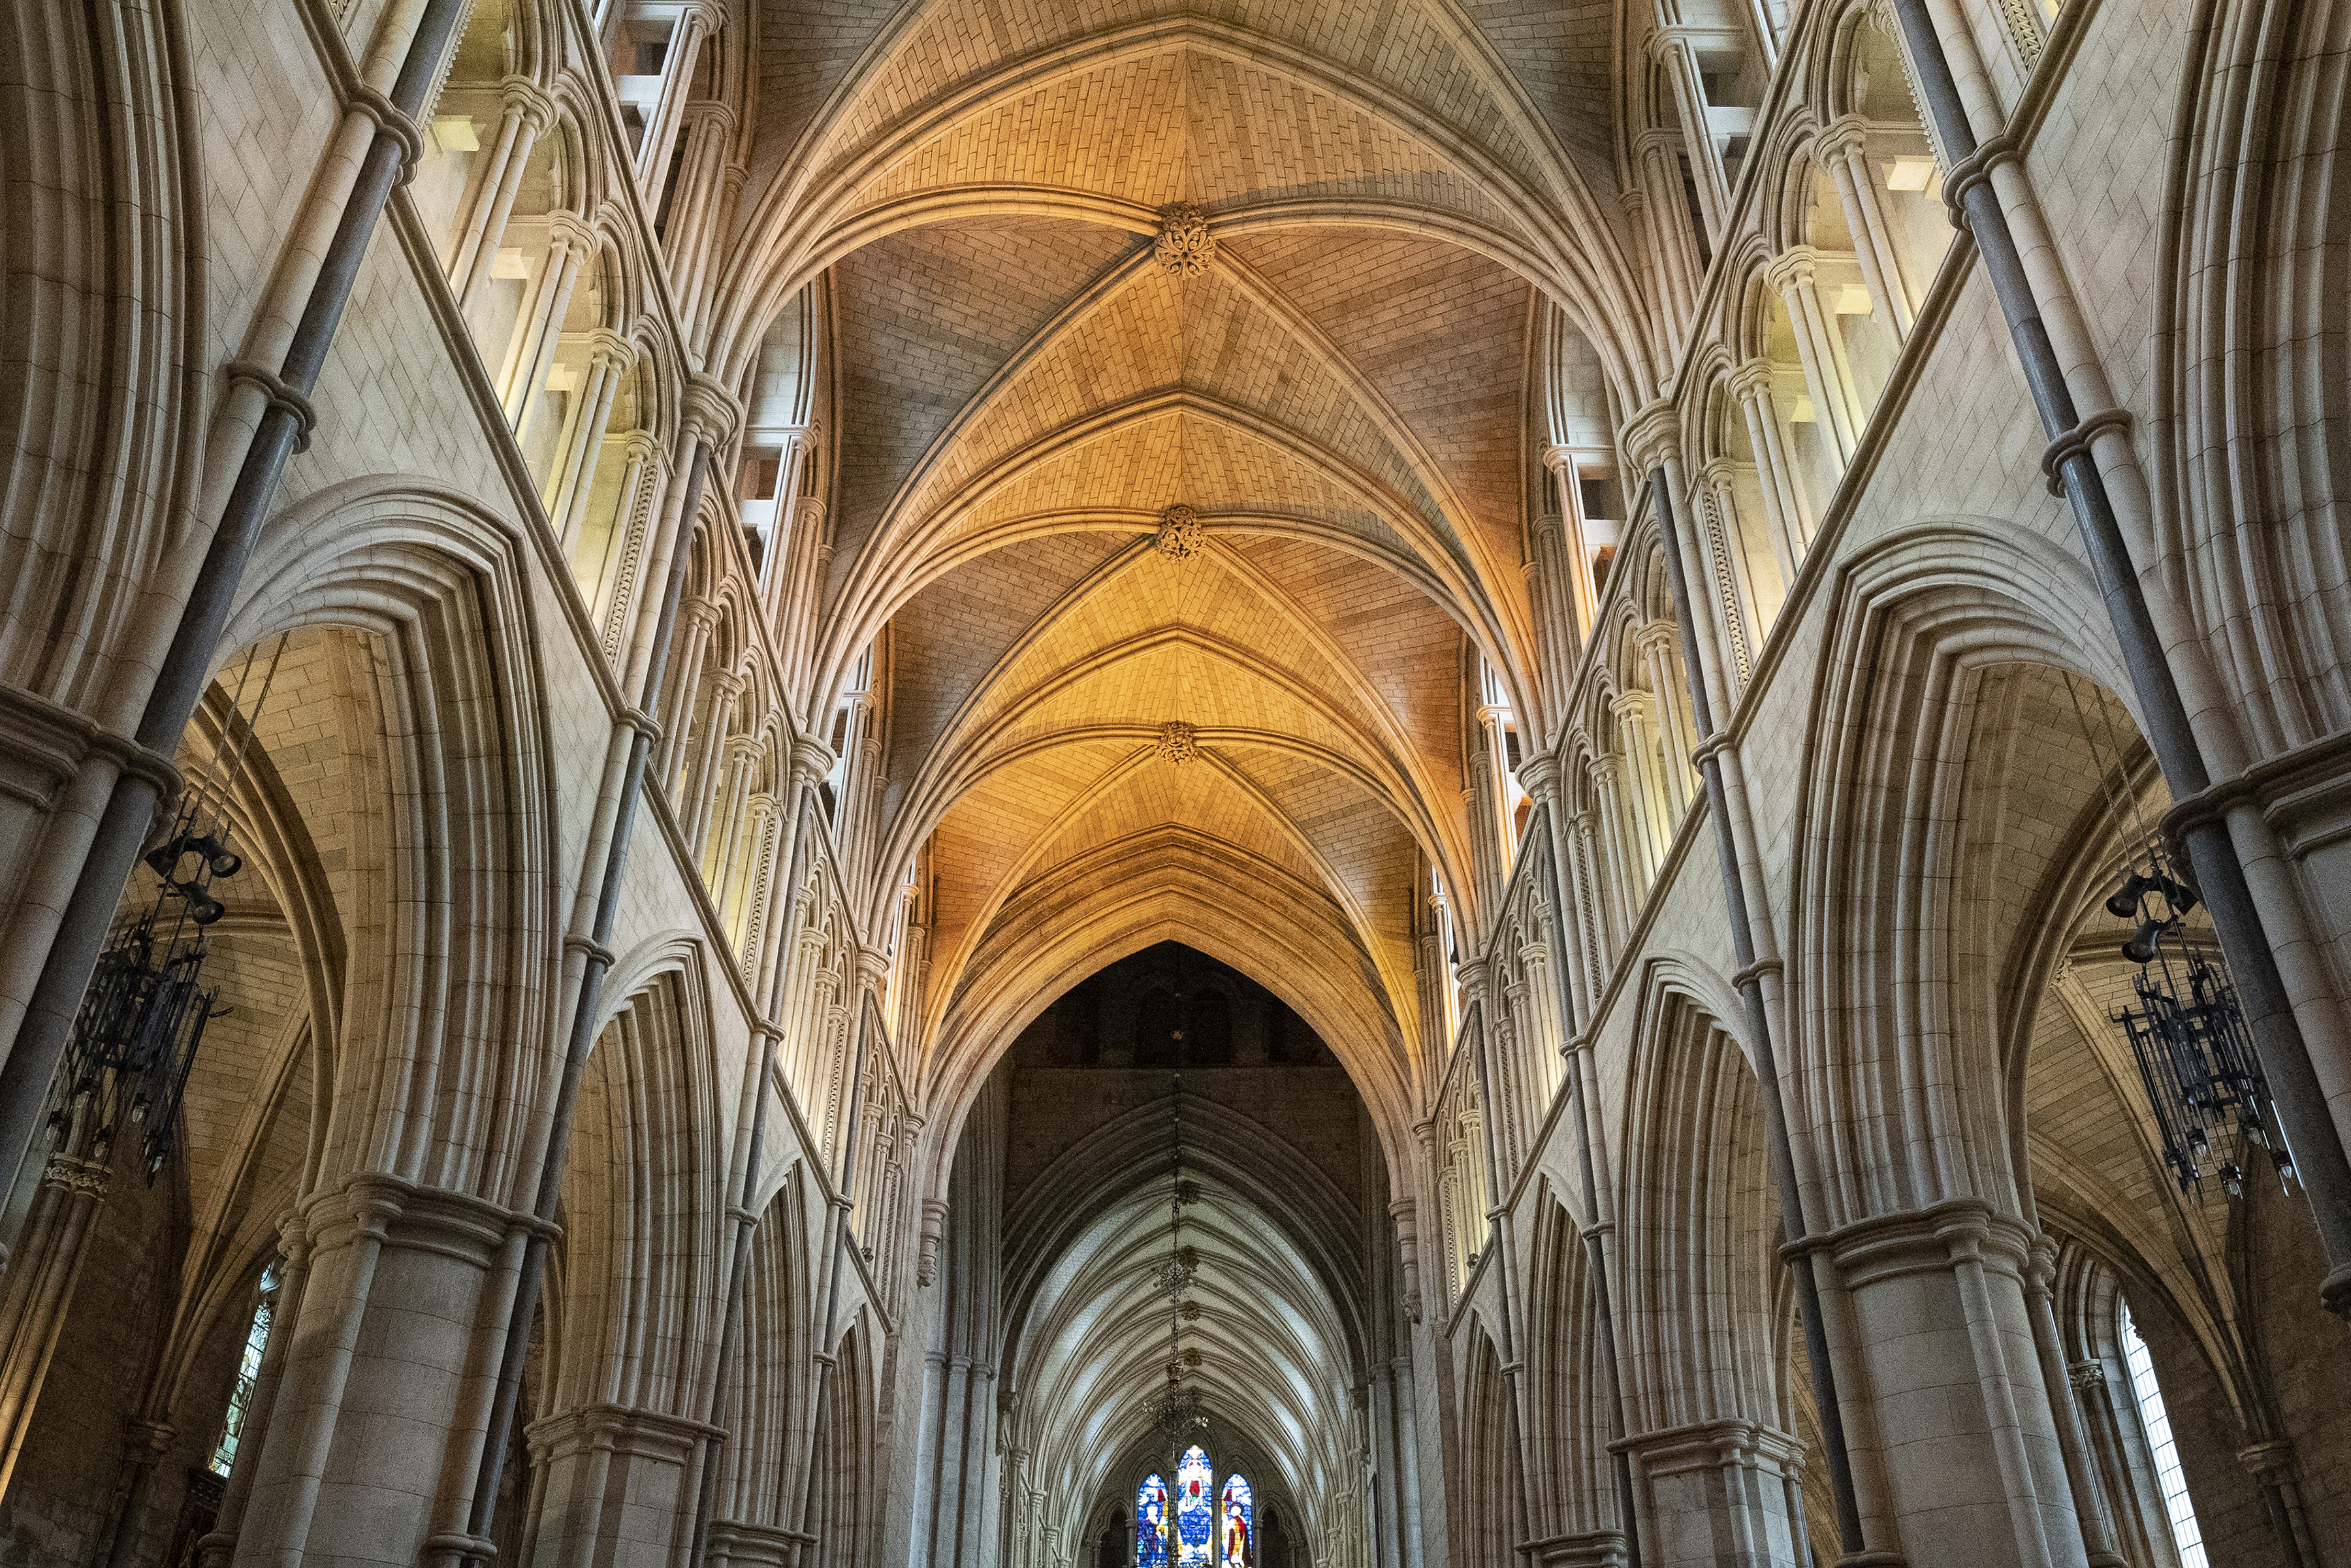 The inside of Southwark Cathedral